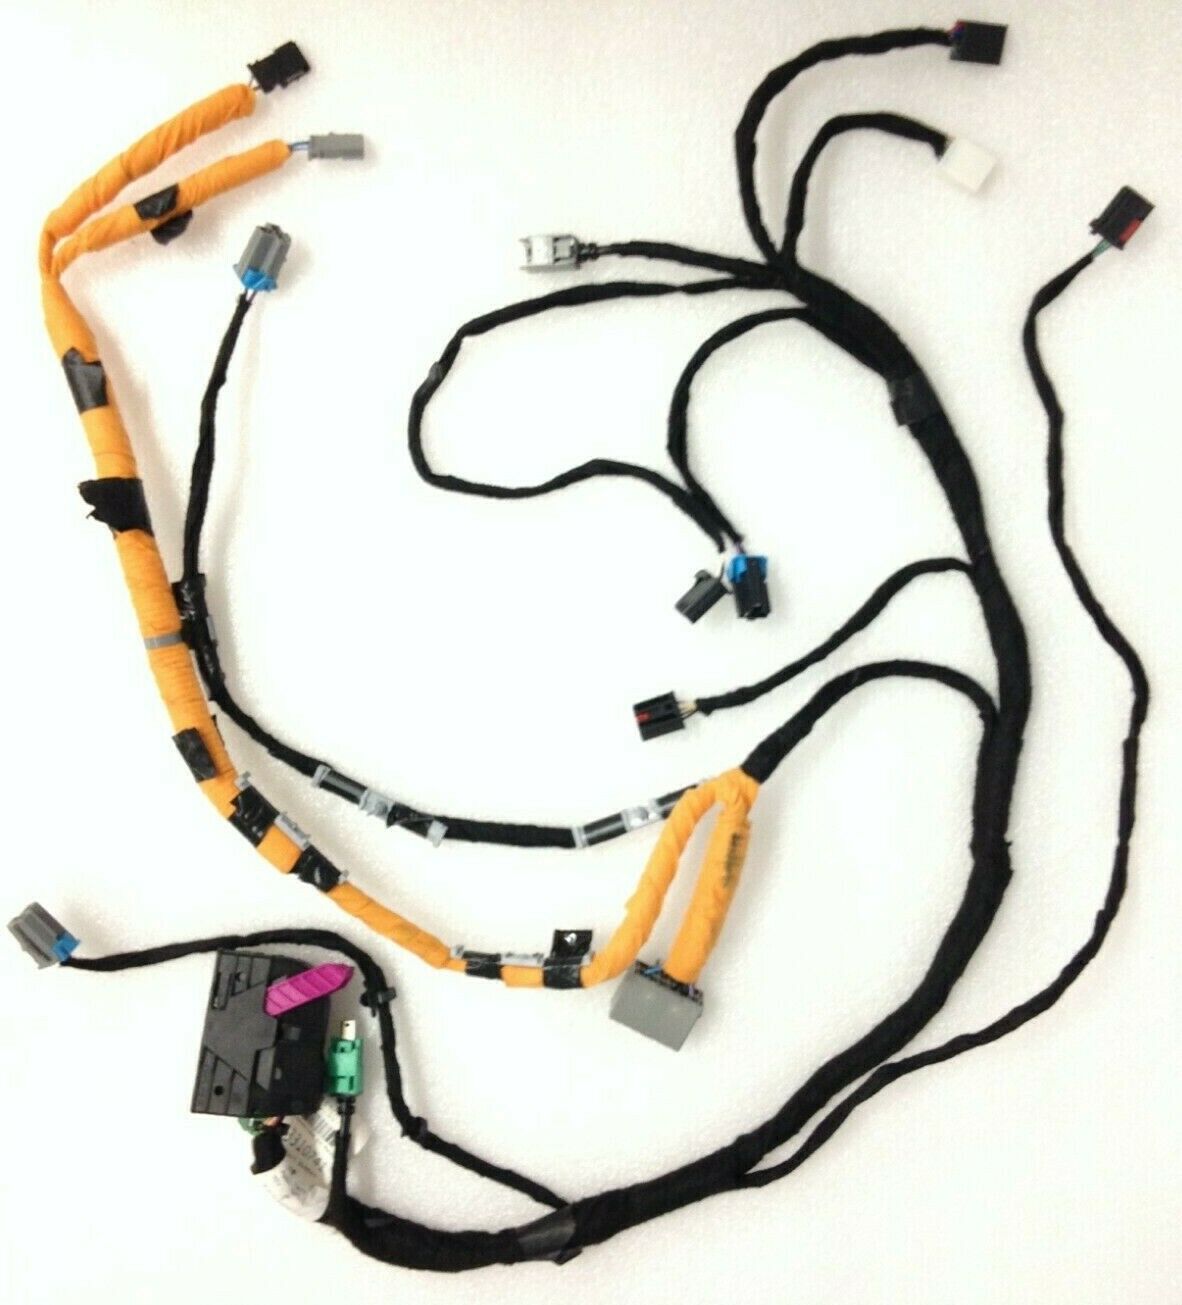 Chevy Impala 2016+ center console wiring harness NEW